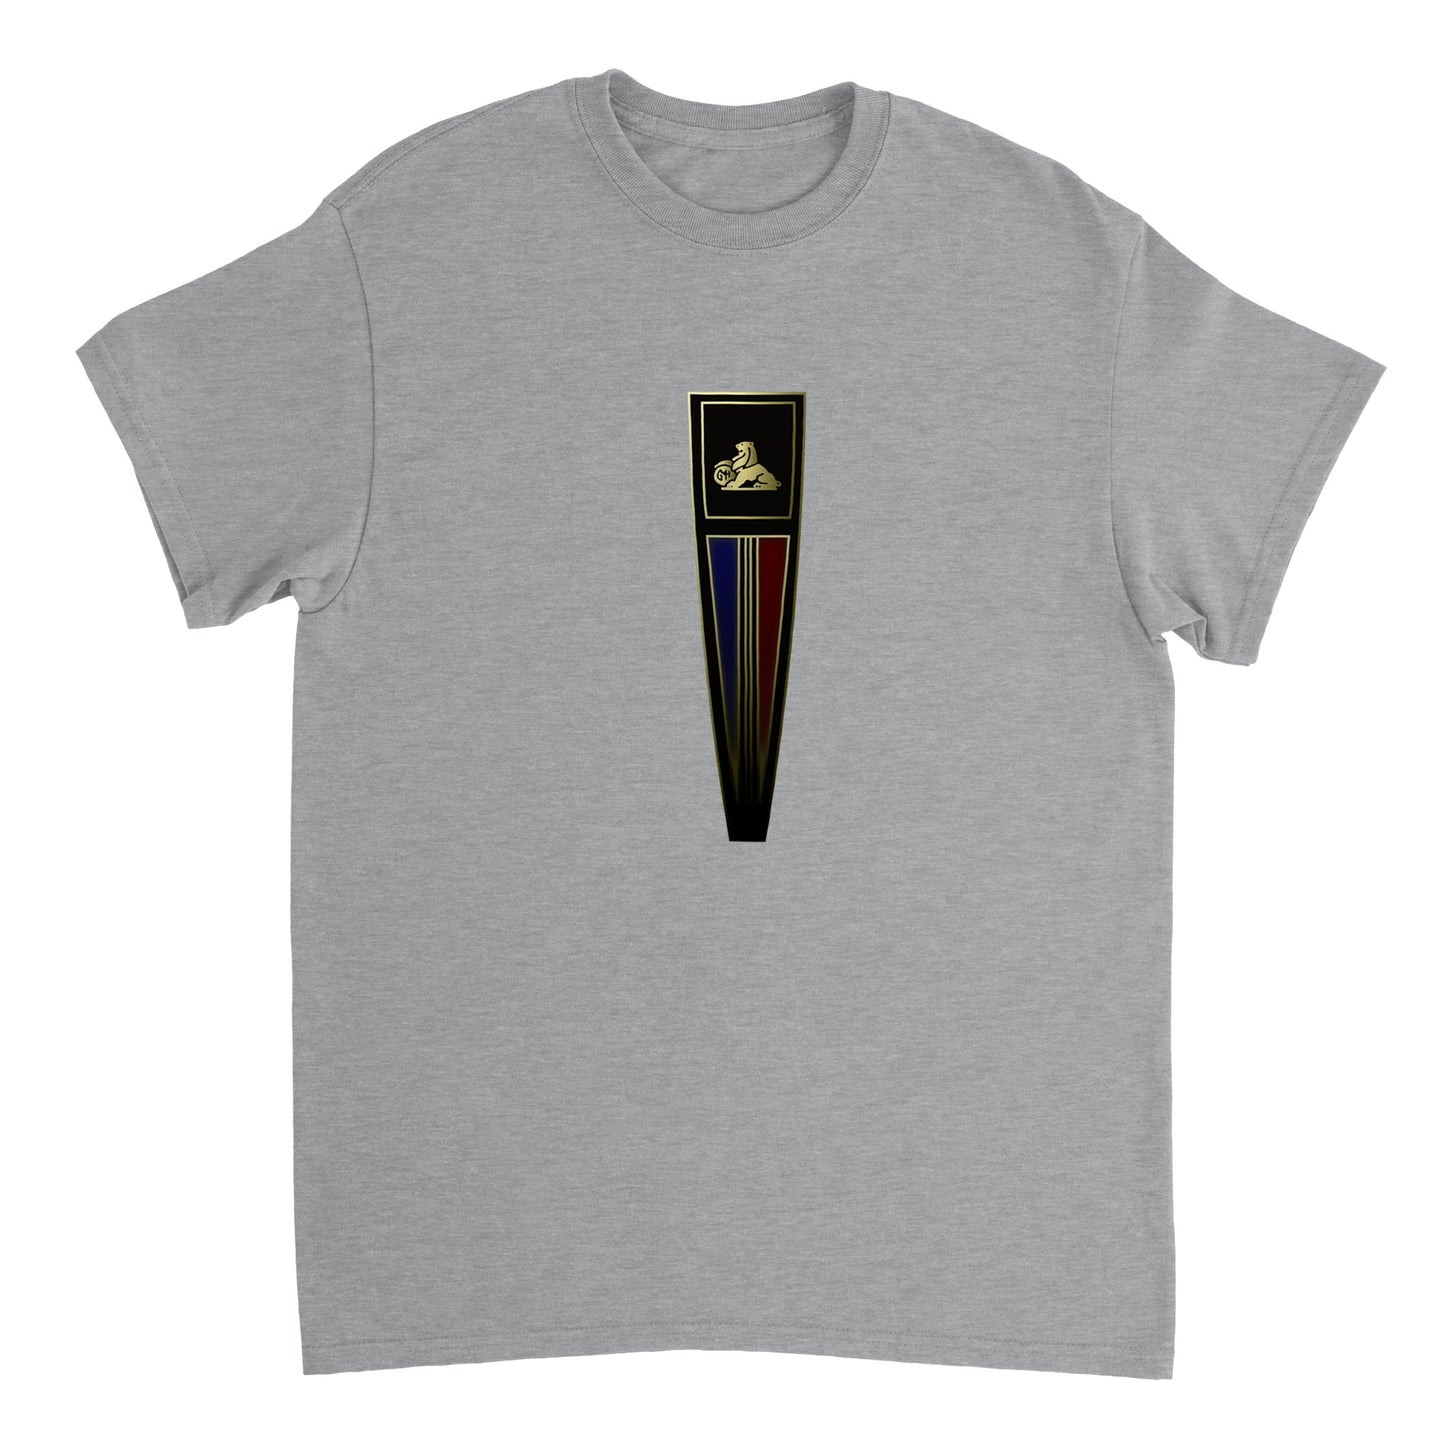 Holden Grille Badge Tee